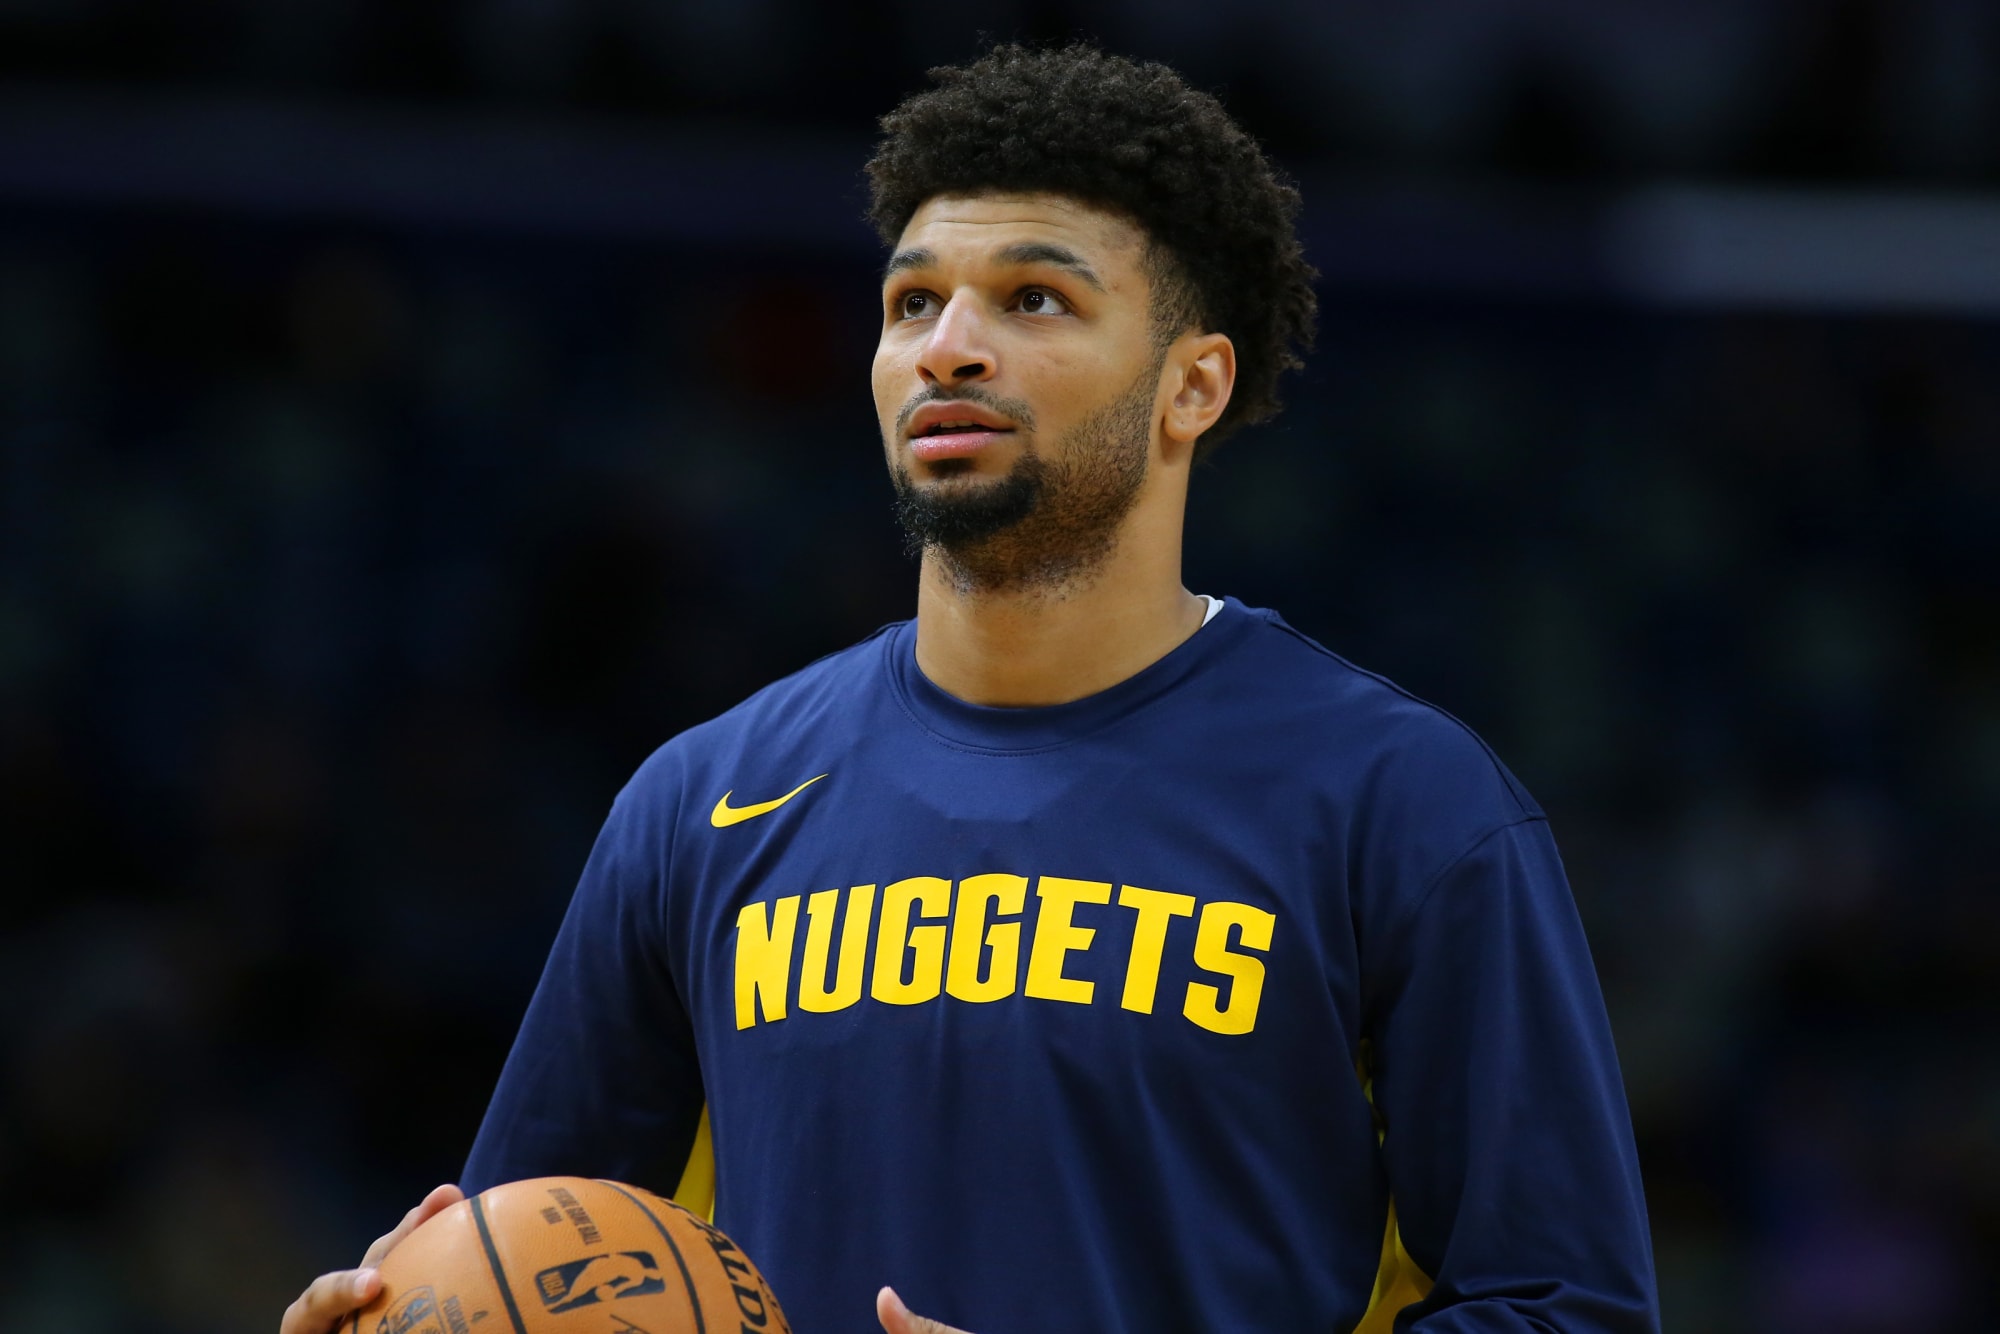 Denver Nuggets star Jamal Murray discusses his favorite rappers